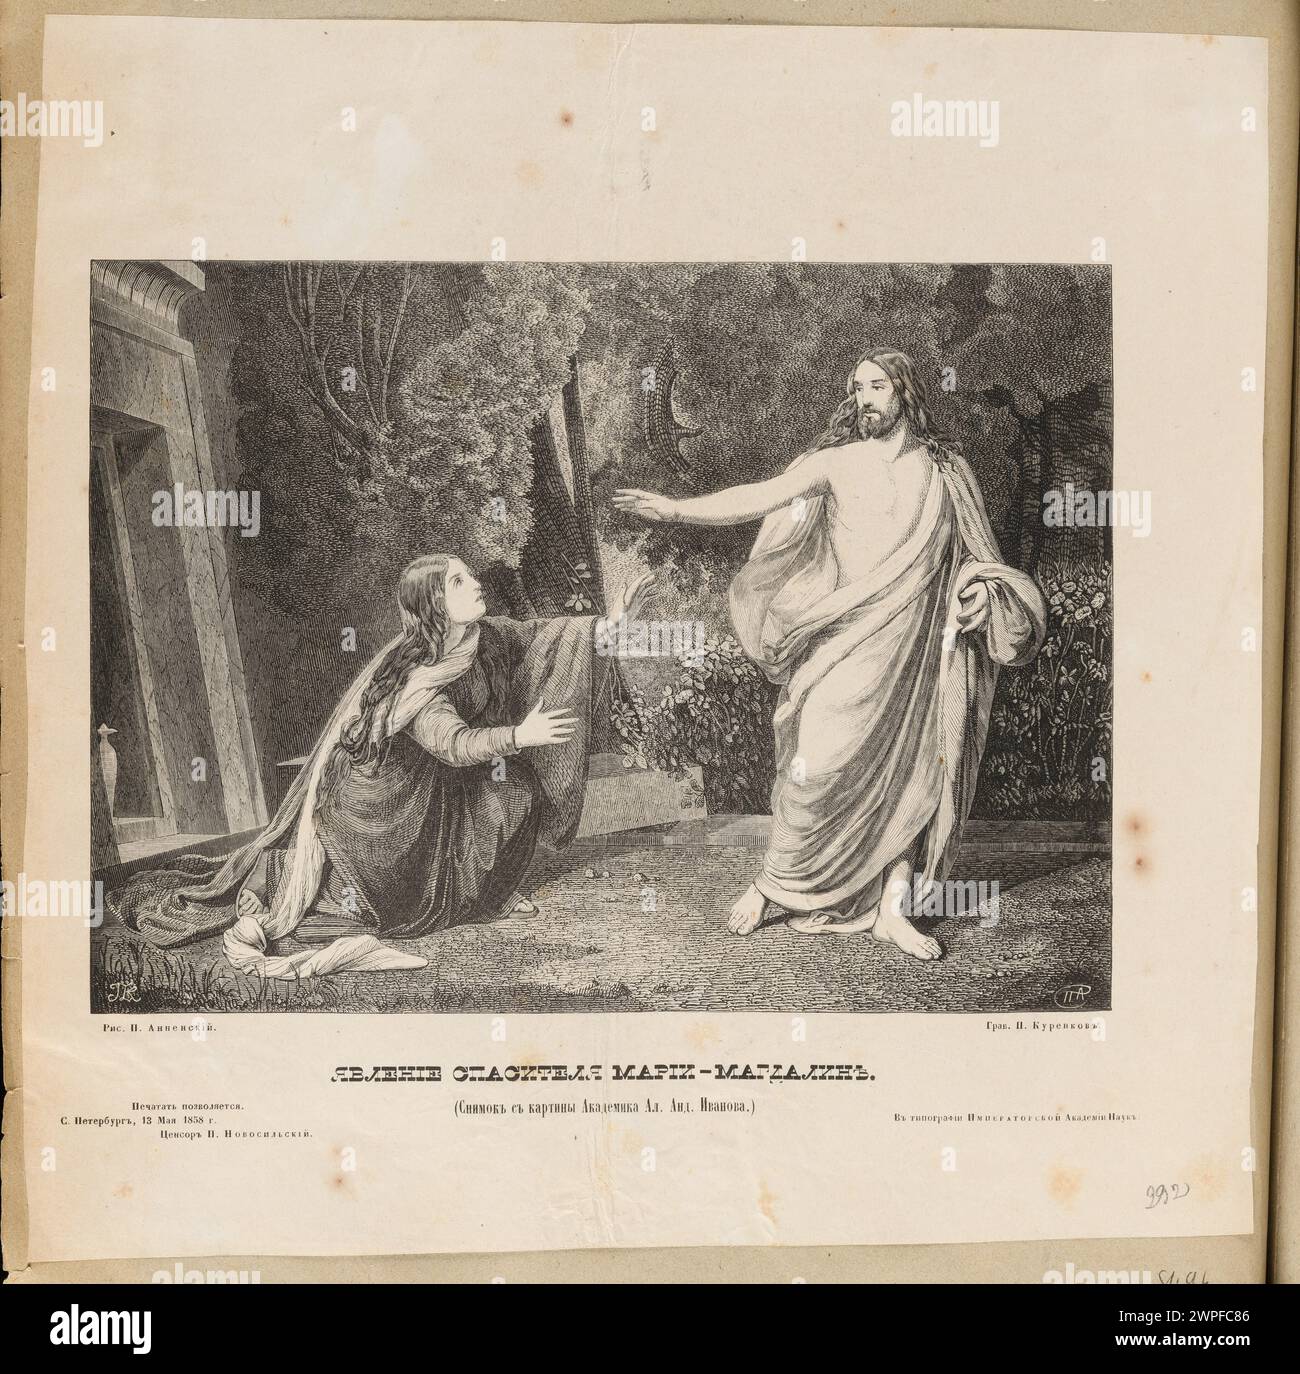 Christ appears Mary Magdalena; Kurenkow, P. (fl. Ca 1850-1870), Annenski, P. (fl. Ca 1850-1860), Iwanow, Aleksandr Andrejewicz (1806-1850), tipography of the Empire of the Academy of Sciences (St. Petersburg; 1803-1914); 1858 (1858-00-00-1858-00-00); Stock Photo